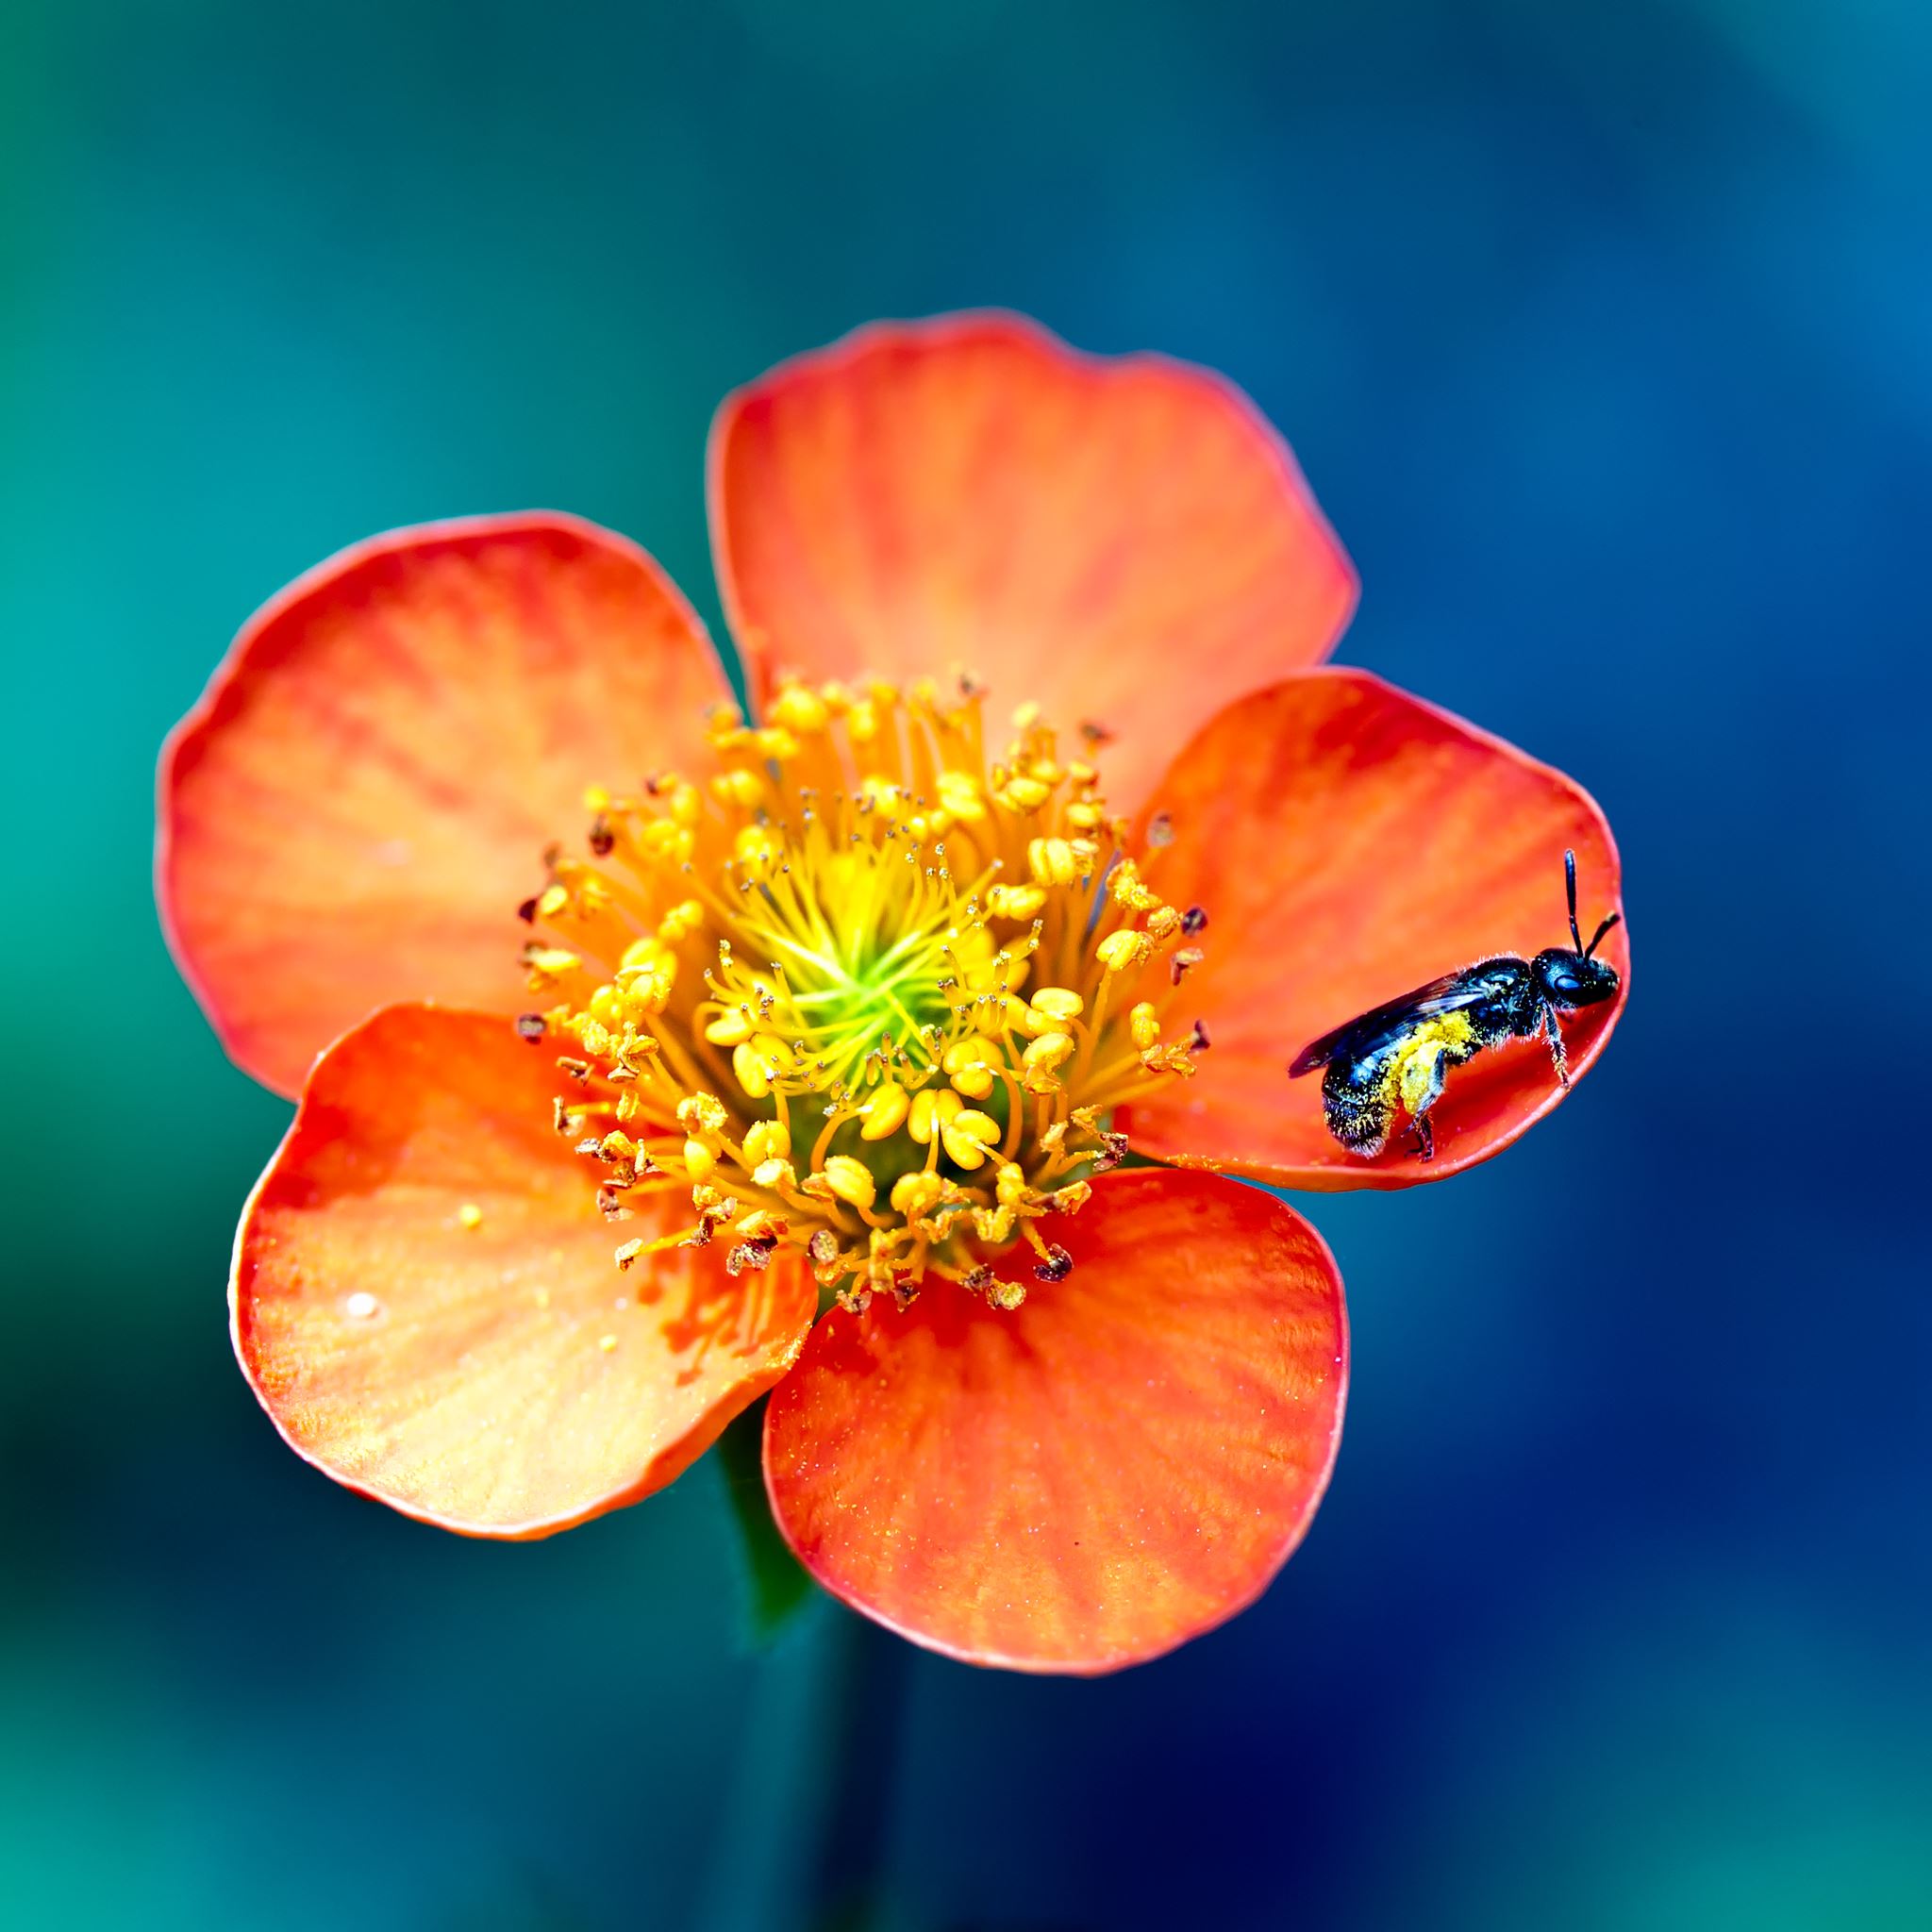 Bee and Flower iPad Air wallpaper 